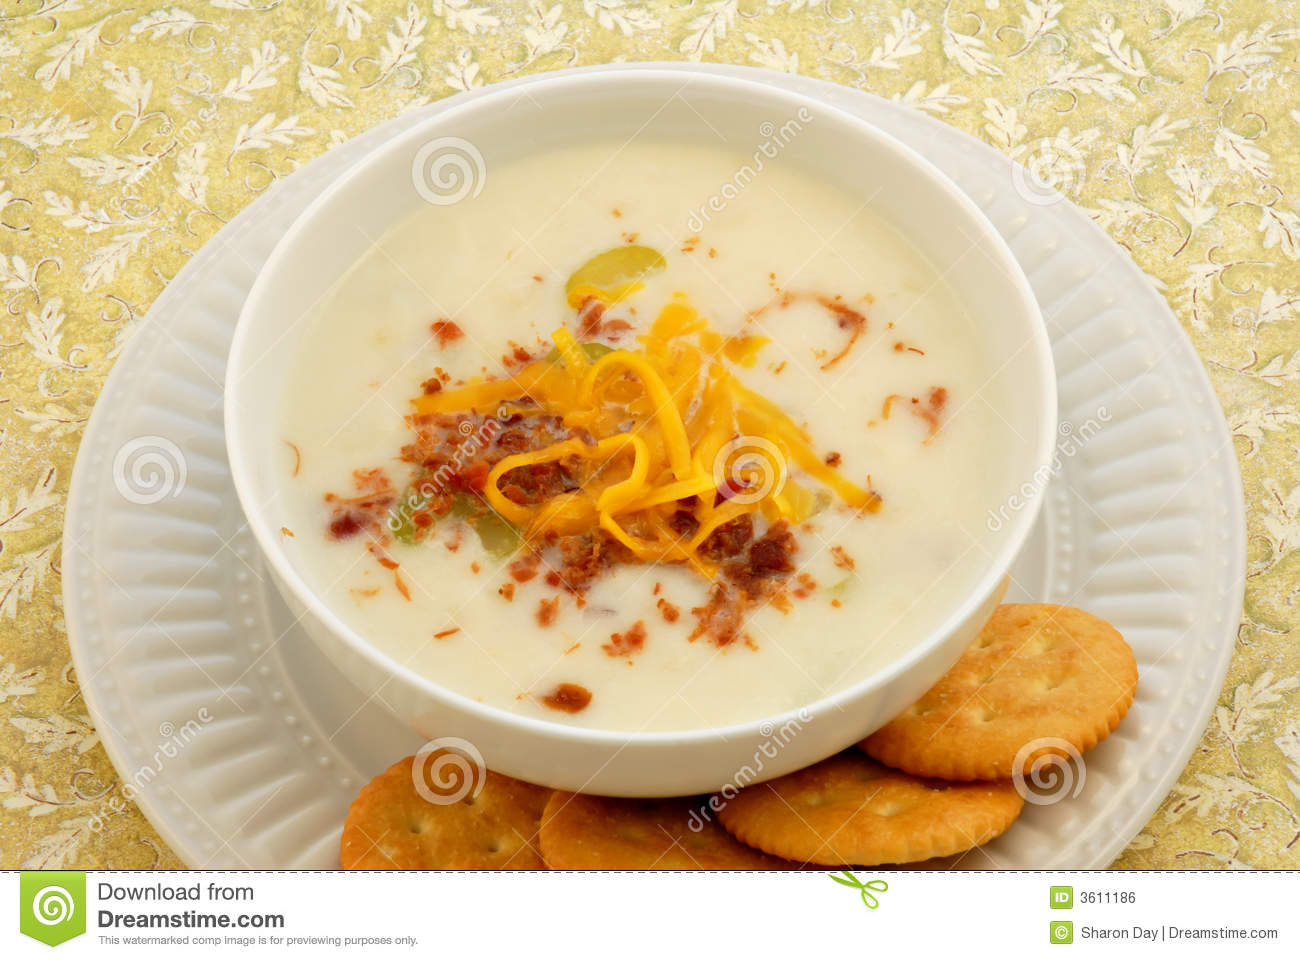 Warm Delicious Bowl Of Homemade Potato Soup With Crackers On The Side